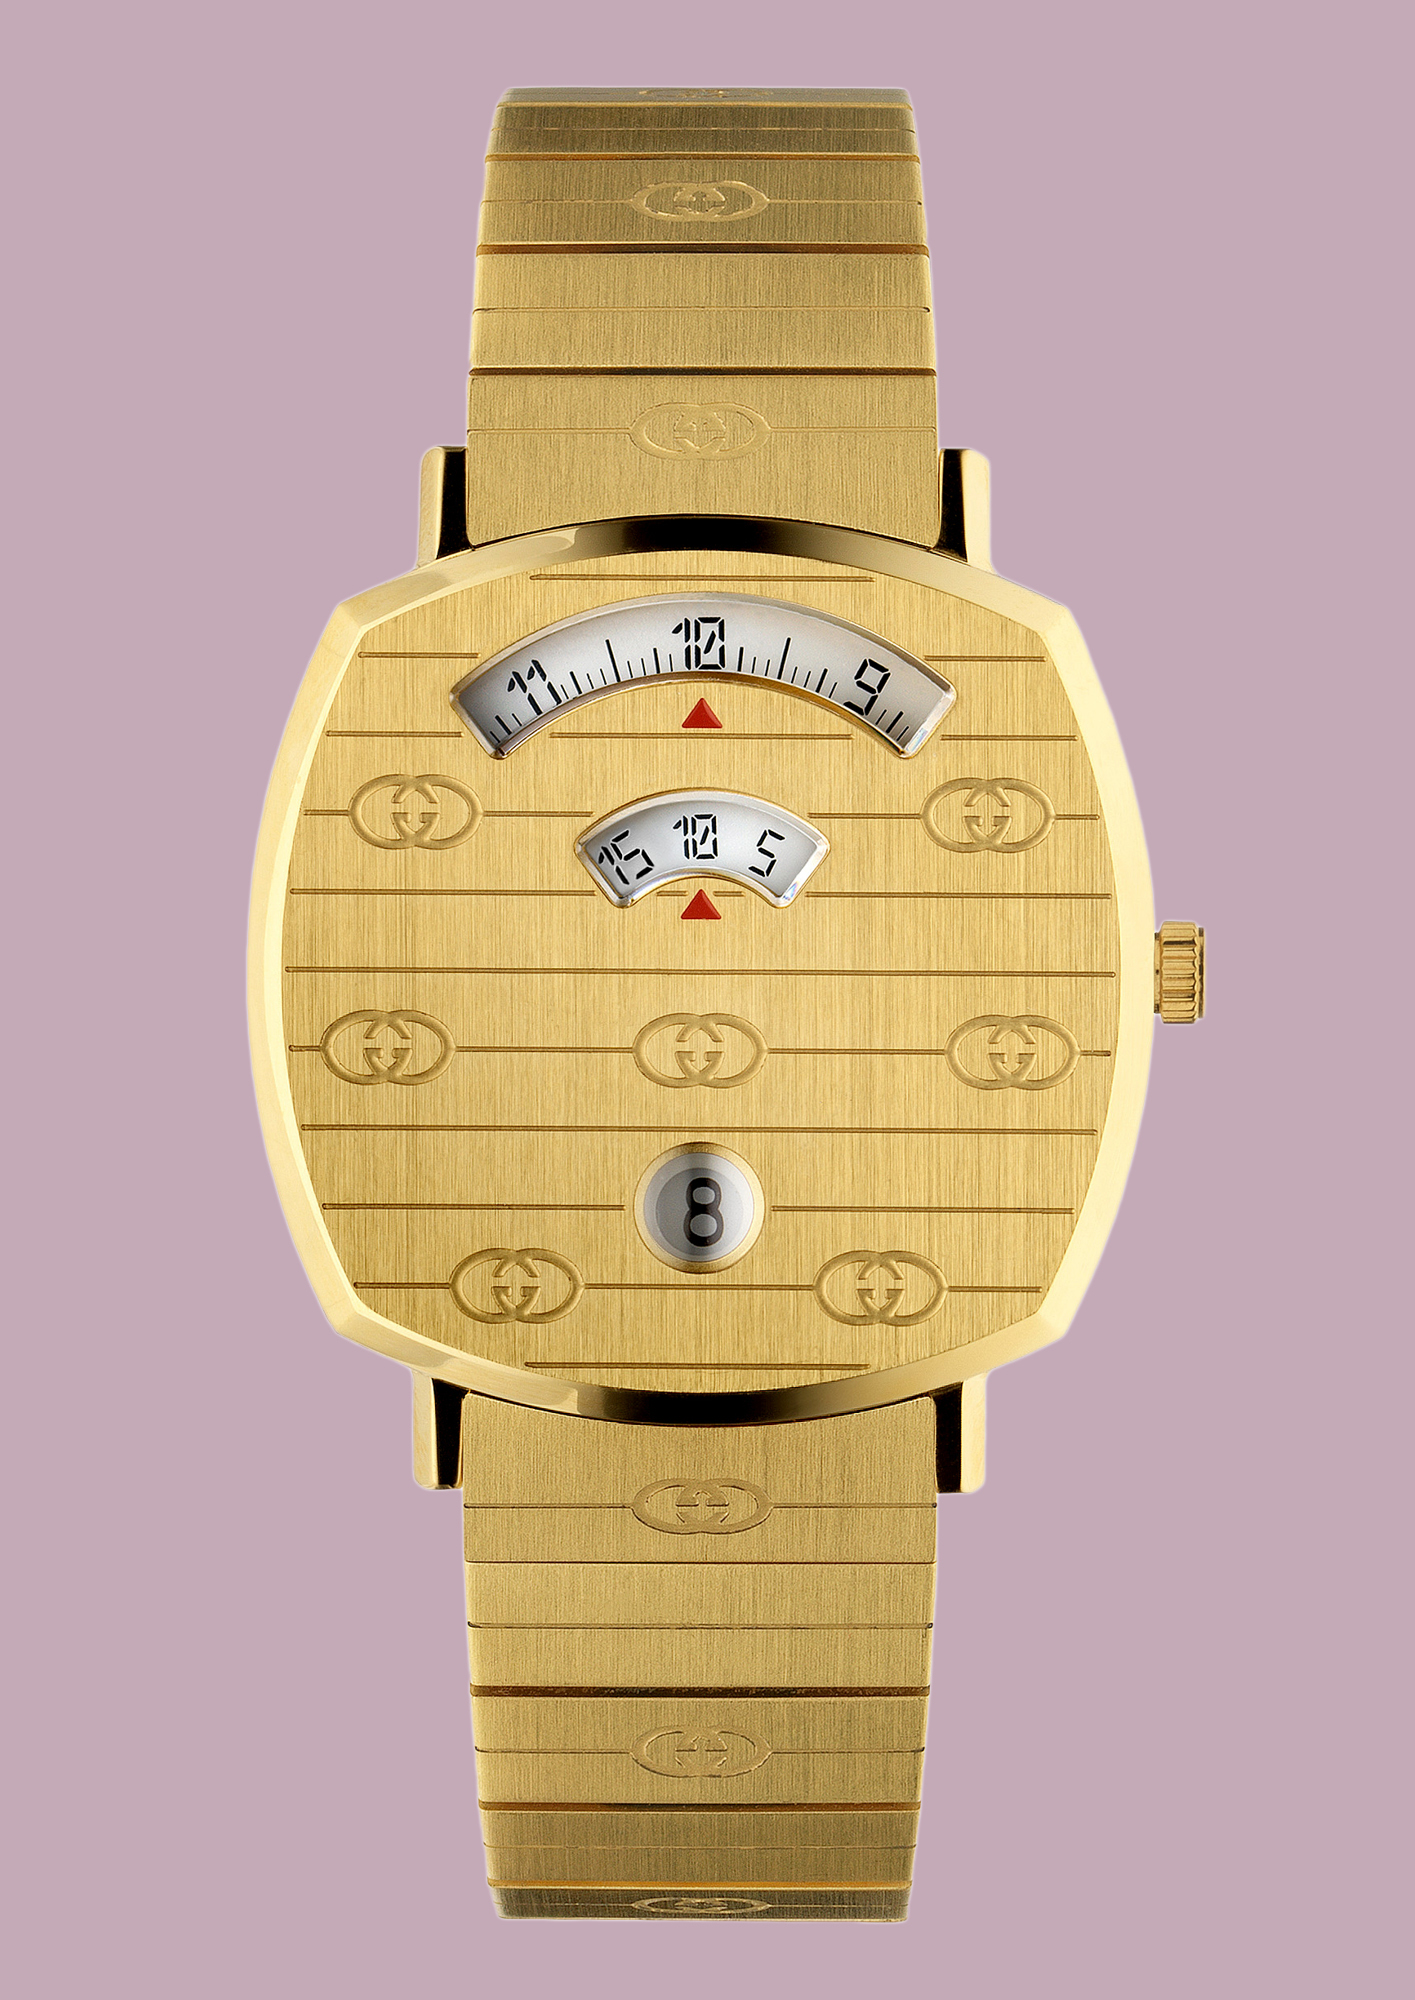 The Gucci Grip watch